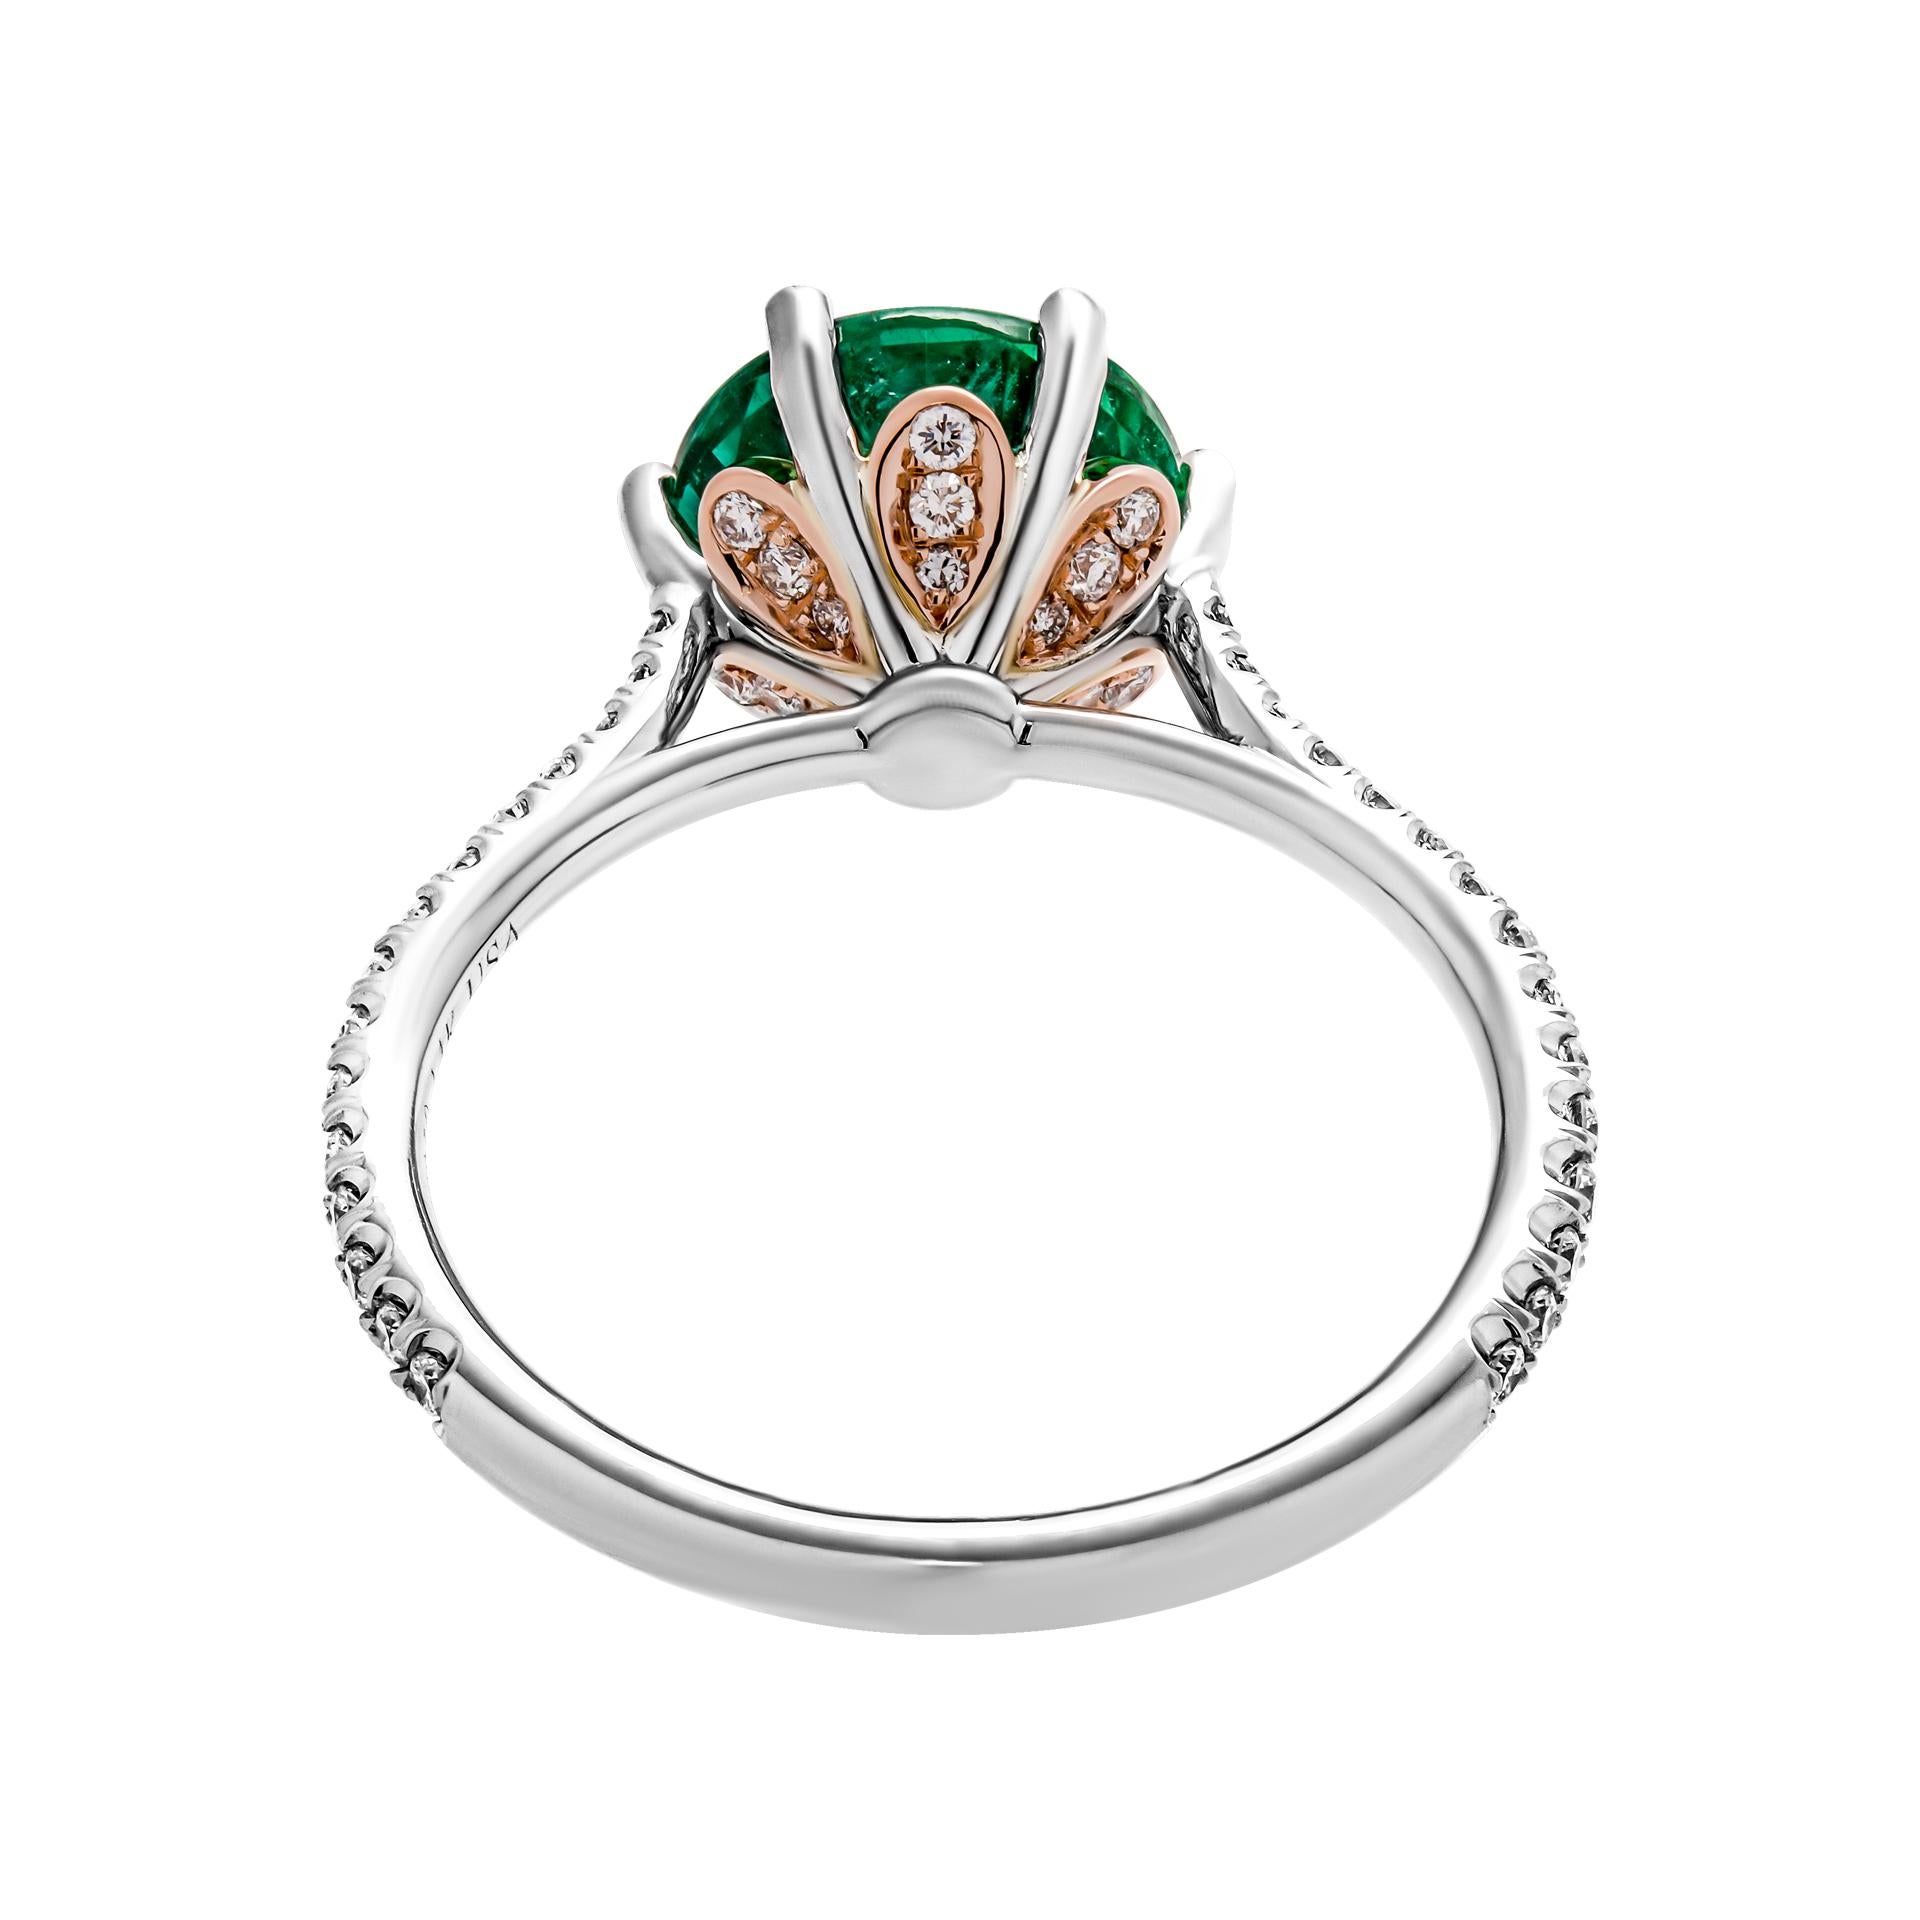 Cocktail Ring with 2.75ct Round Green Emerald in Platinum & 14K Rose Gold; 
Diamond cathedral shank & diamond petals in Rose Gold with 6 prongs 
Total Carat Weight of small stones: 0.98ct
 Size: 5.75
Appraisal available upon request 
Retail value: